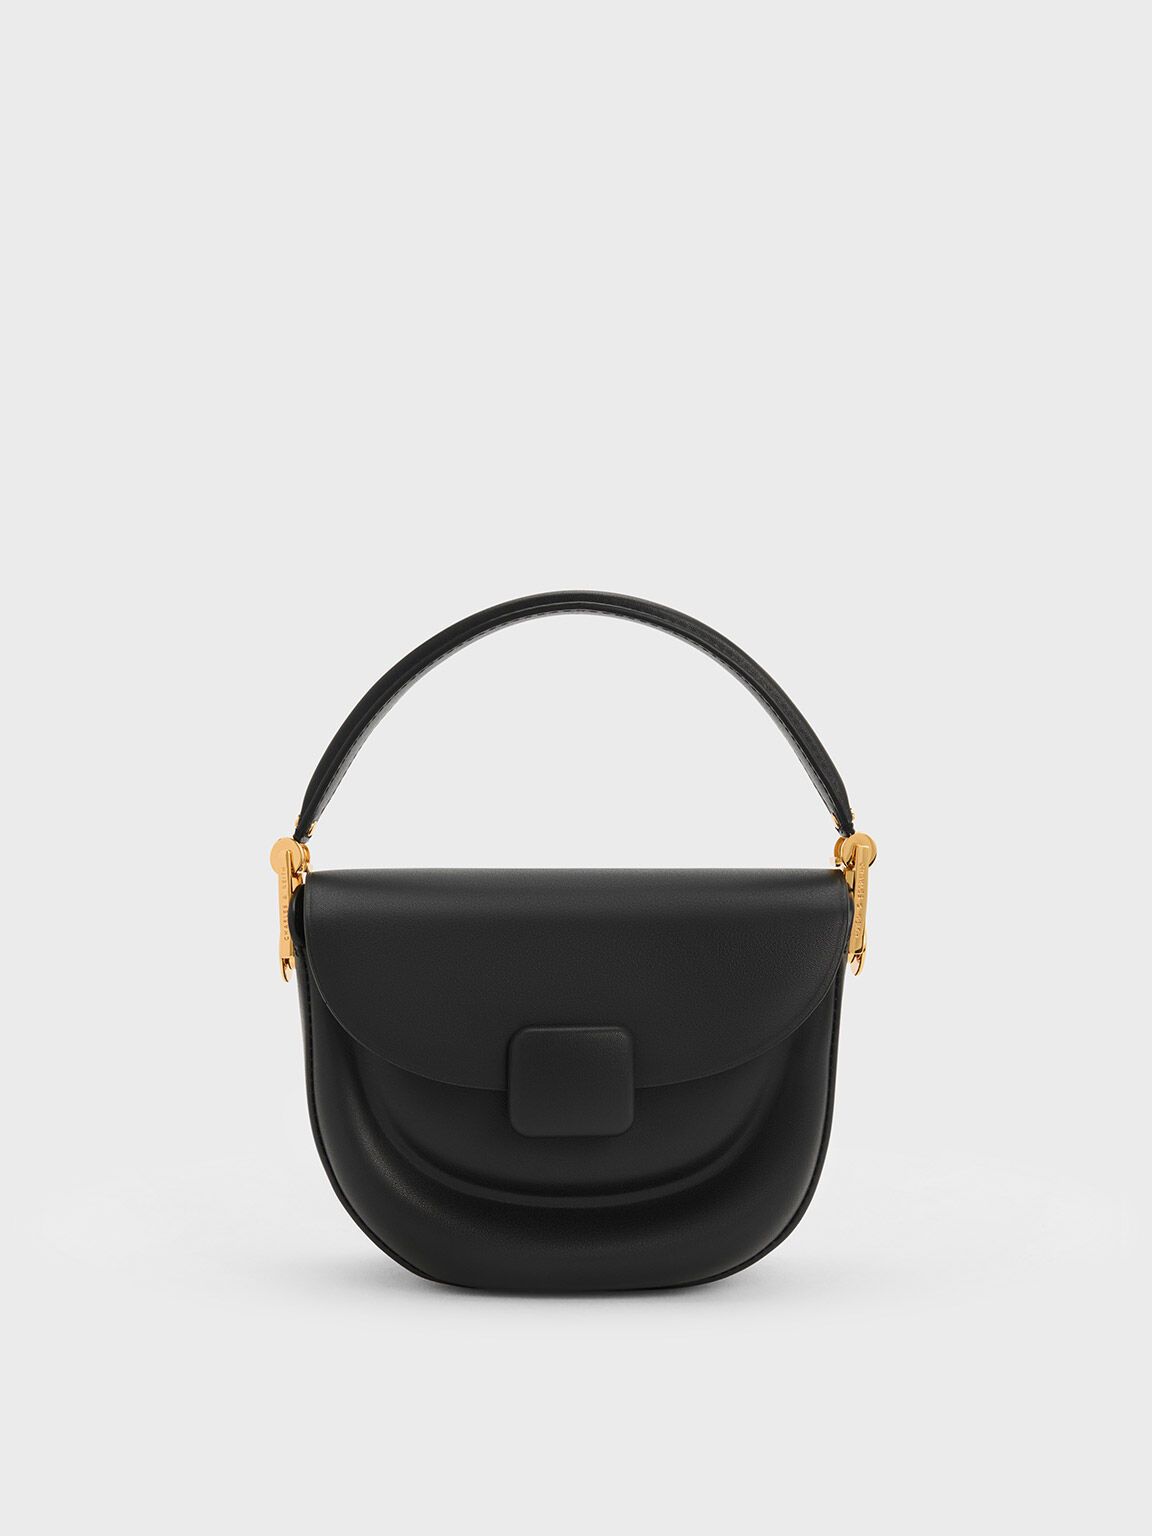 Celine Mini Triomphe Bag, my fave these days